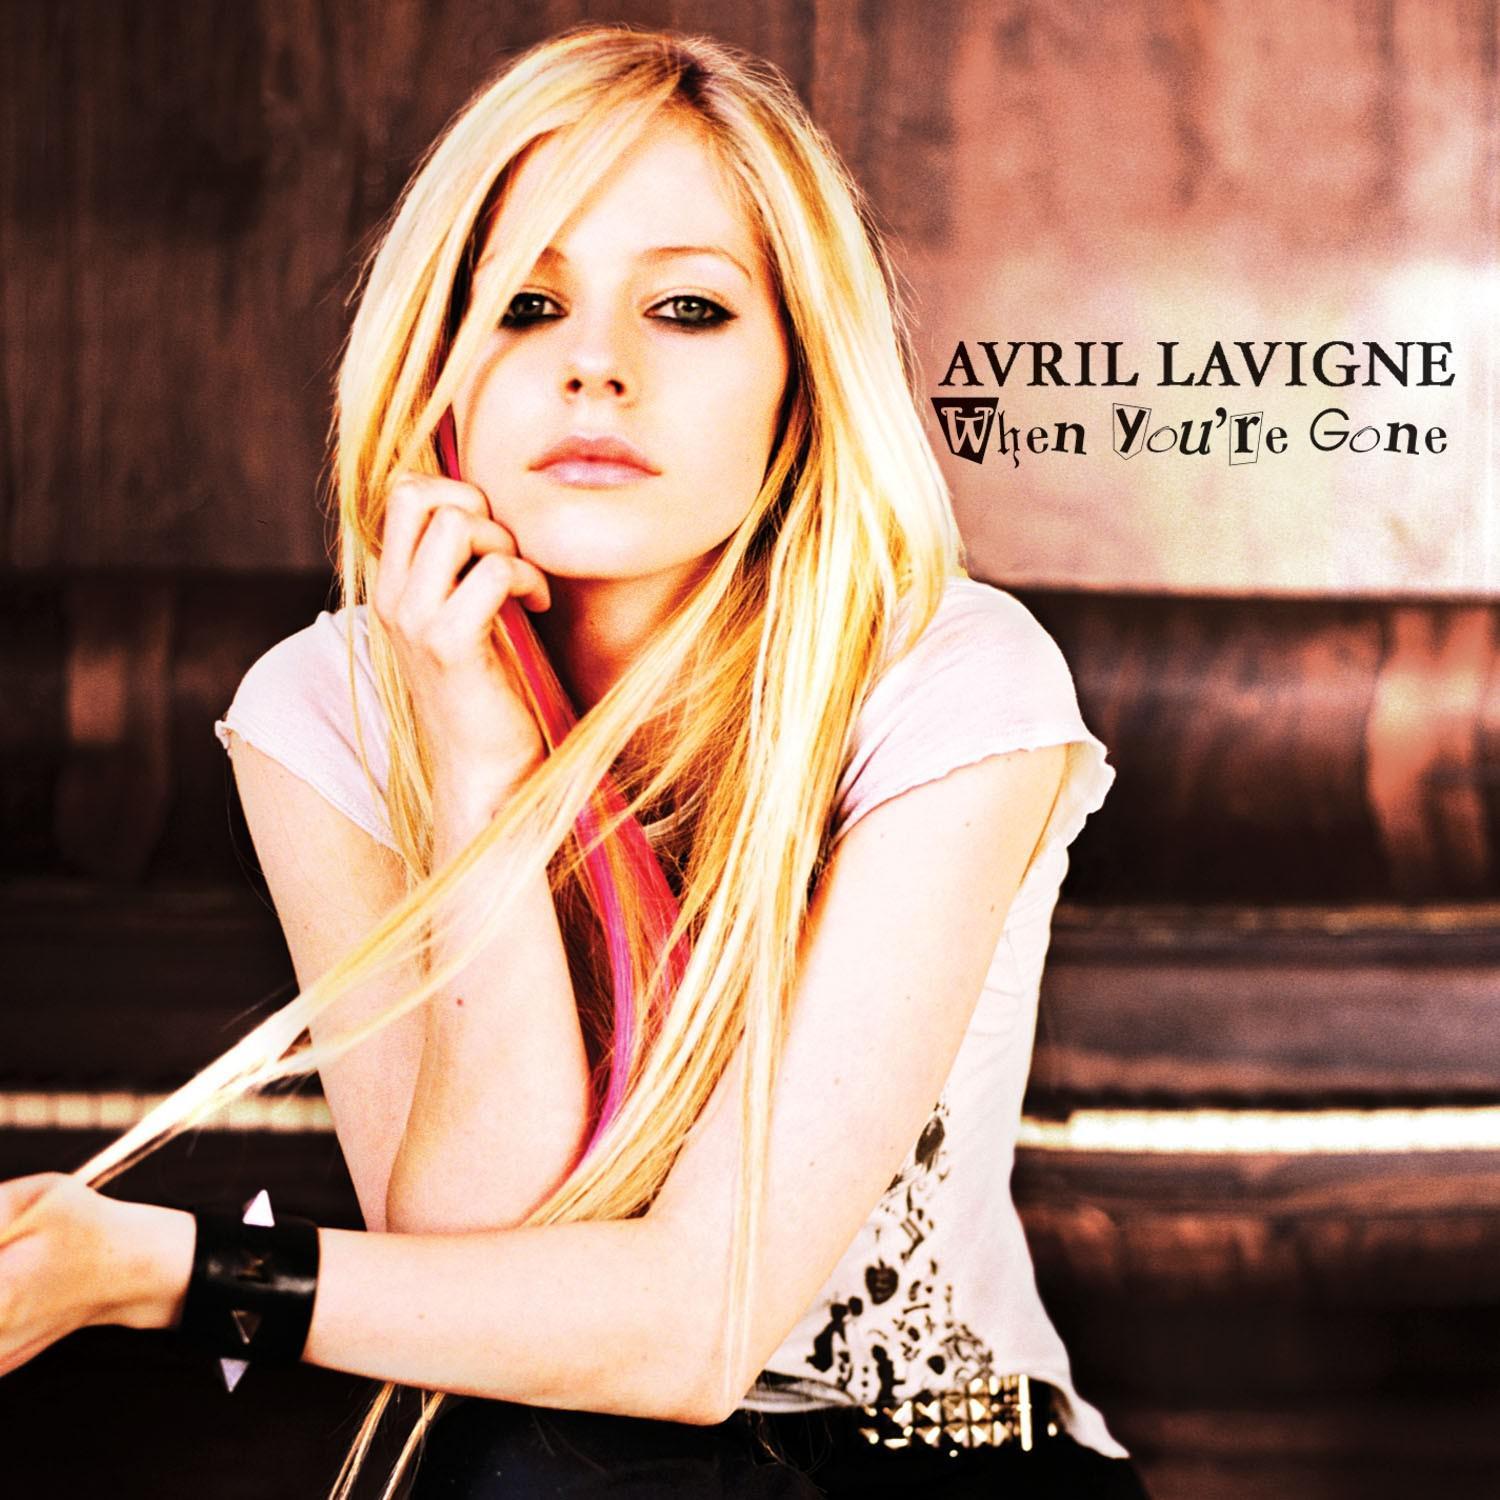 When You're Gone Avril Lavigne Wiki FANDOM powered by Wikia